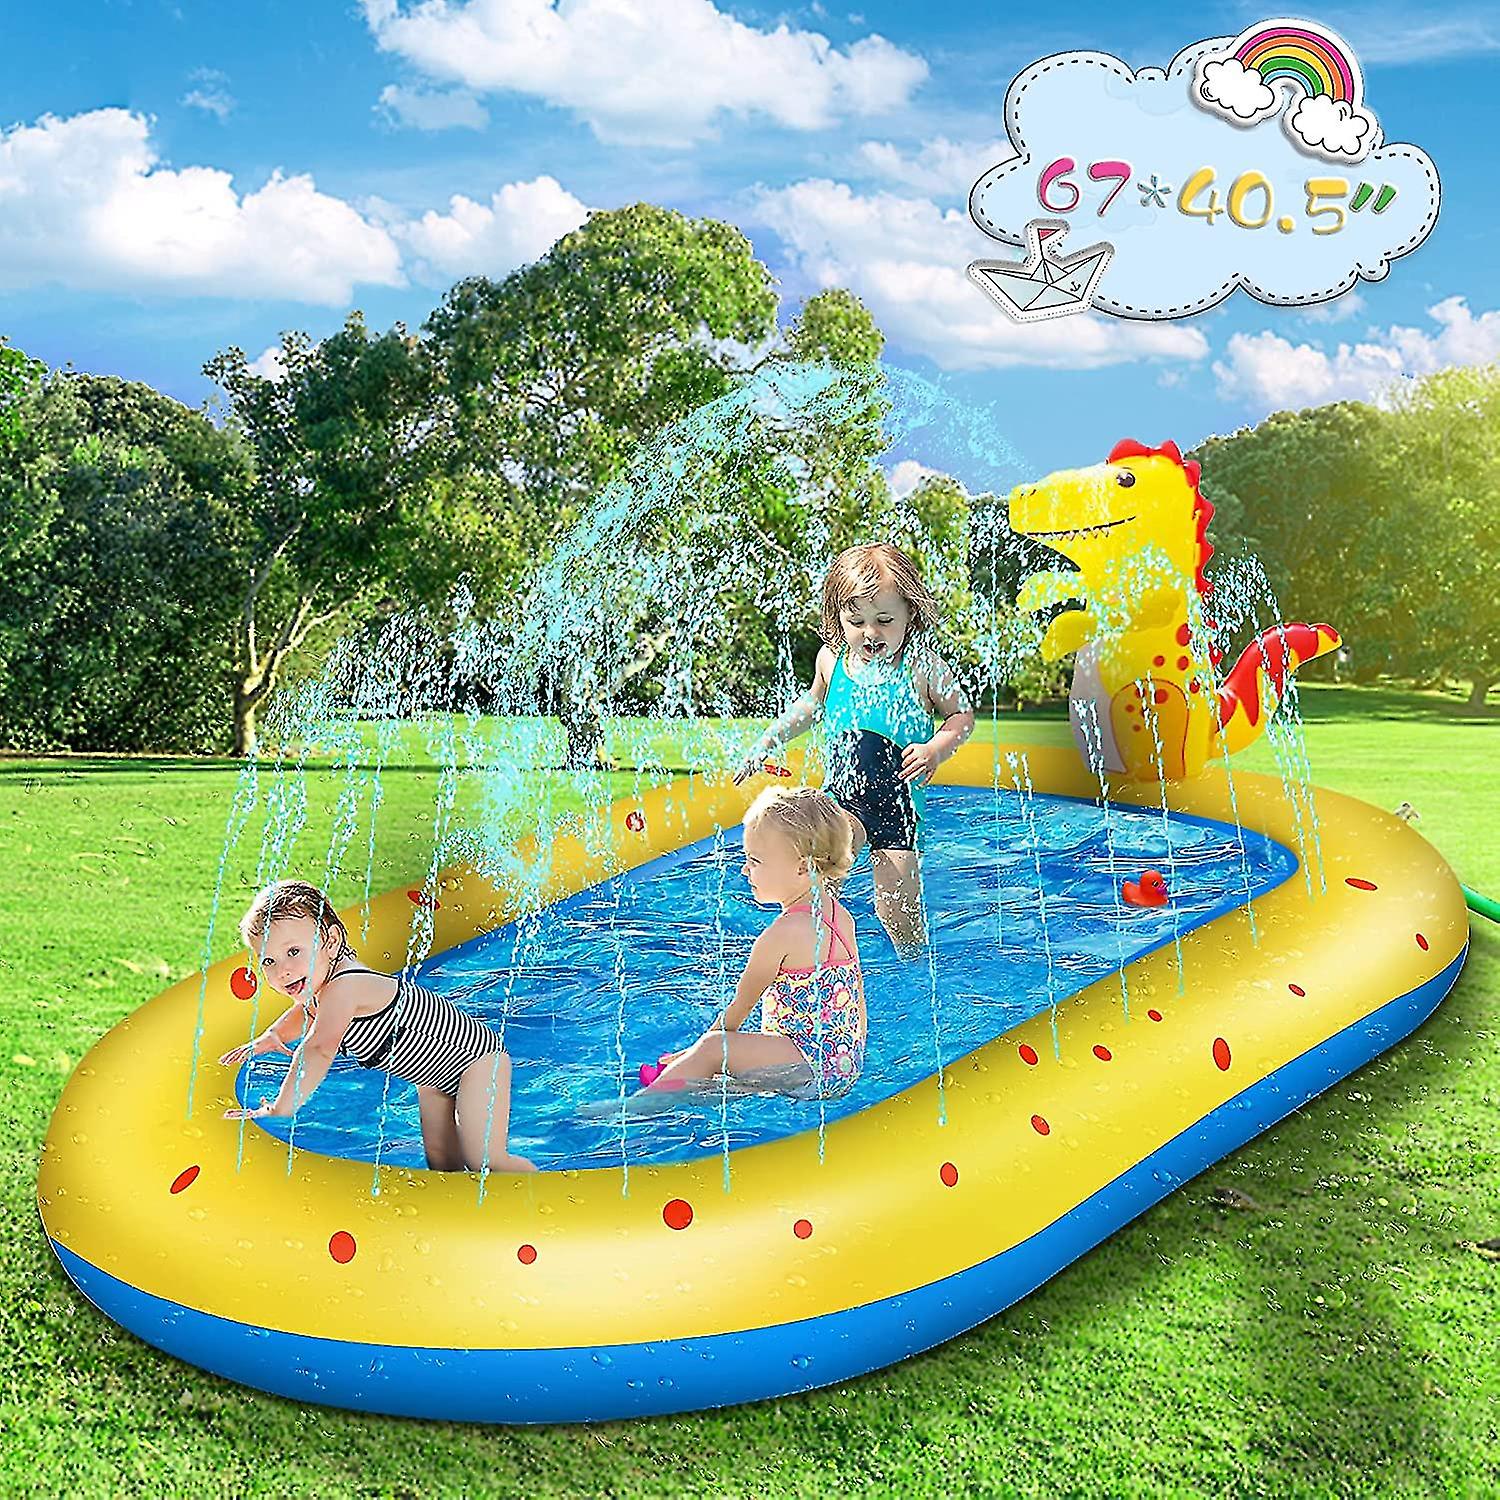 Paddling Pools For Kids Inflatable Sprinkler Mat Swimming Pool For Toddlers Age 3+ And Splash Pad Wading Pool For Fountain Games ， Summer Backyard Gar